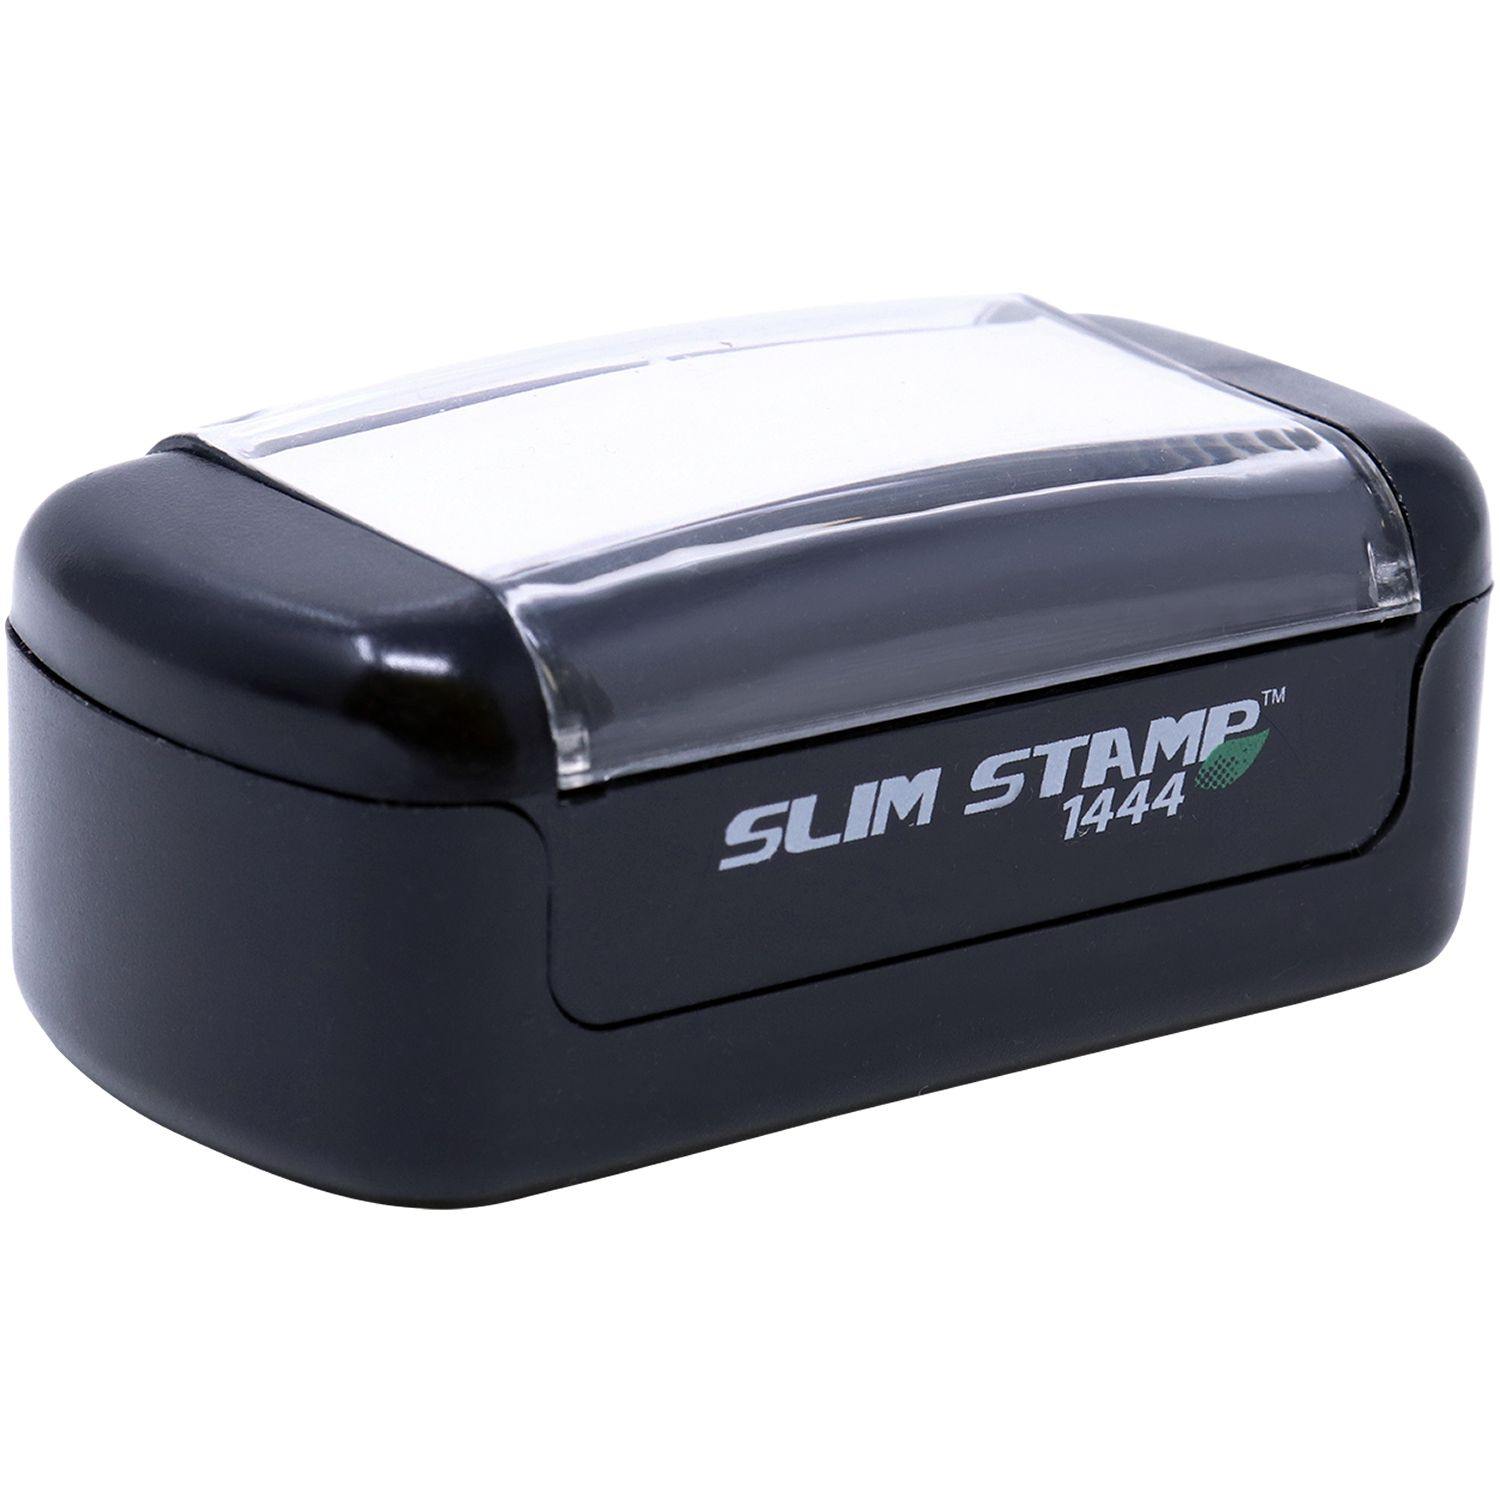 Alt View of Slim Pre Inked Exhibit Stamp Mount Angle